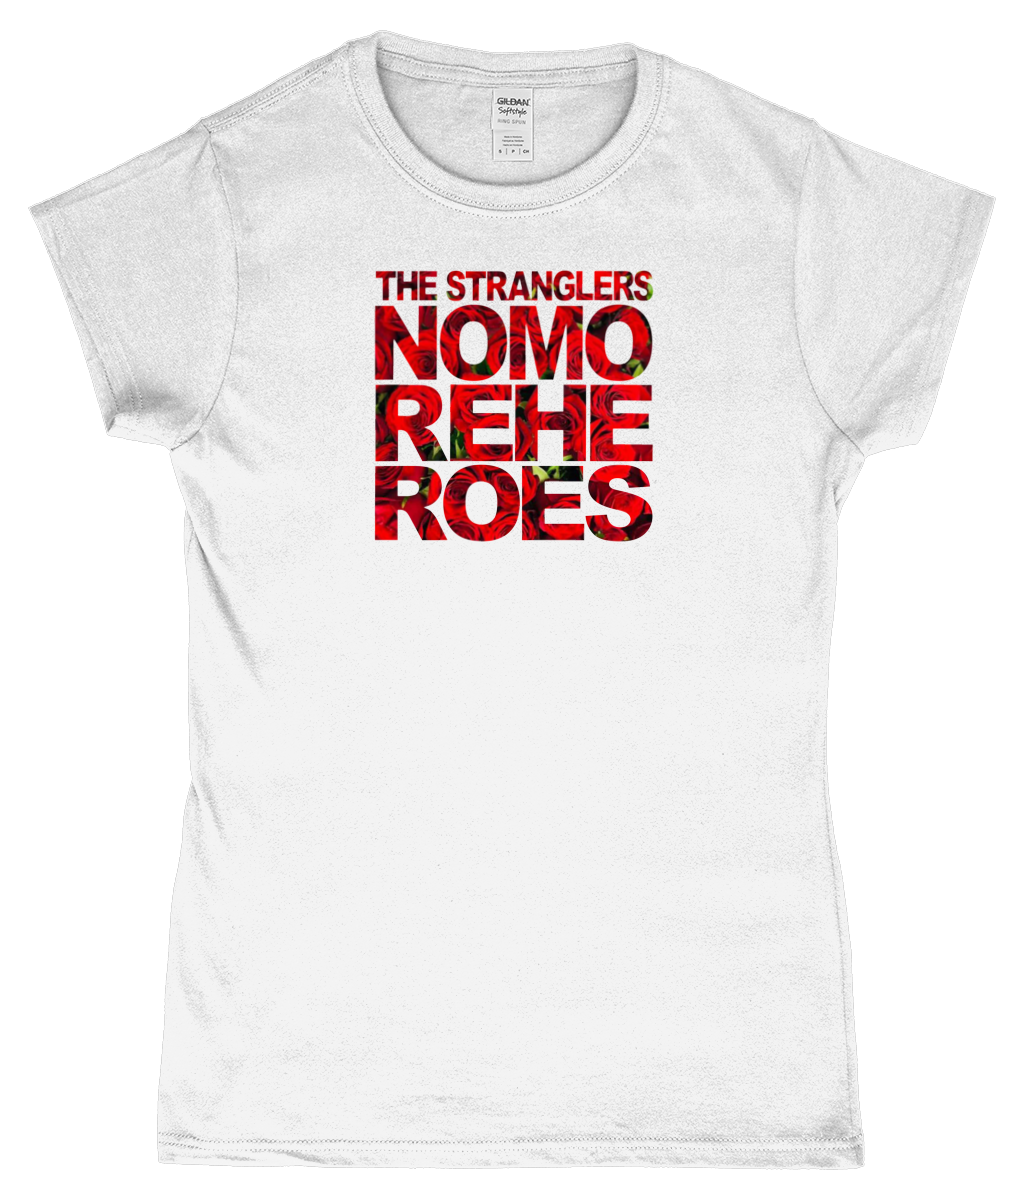 The Stranglers, No More Heroes, T-Shirt, Women's